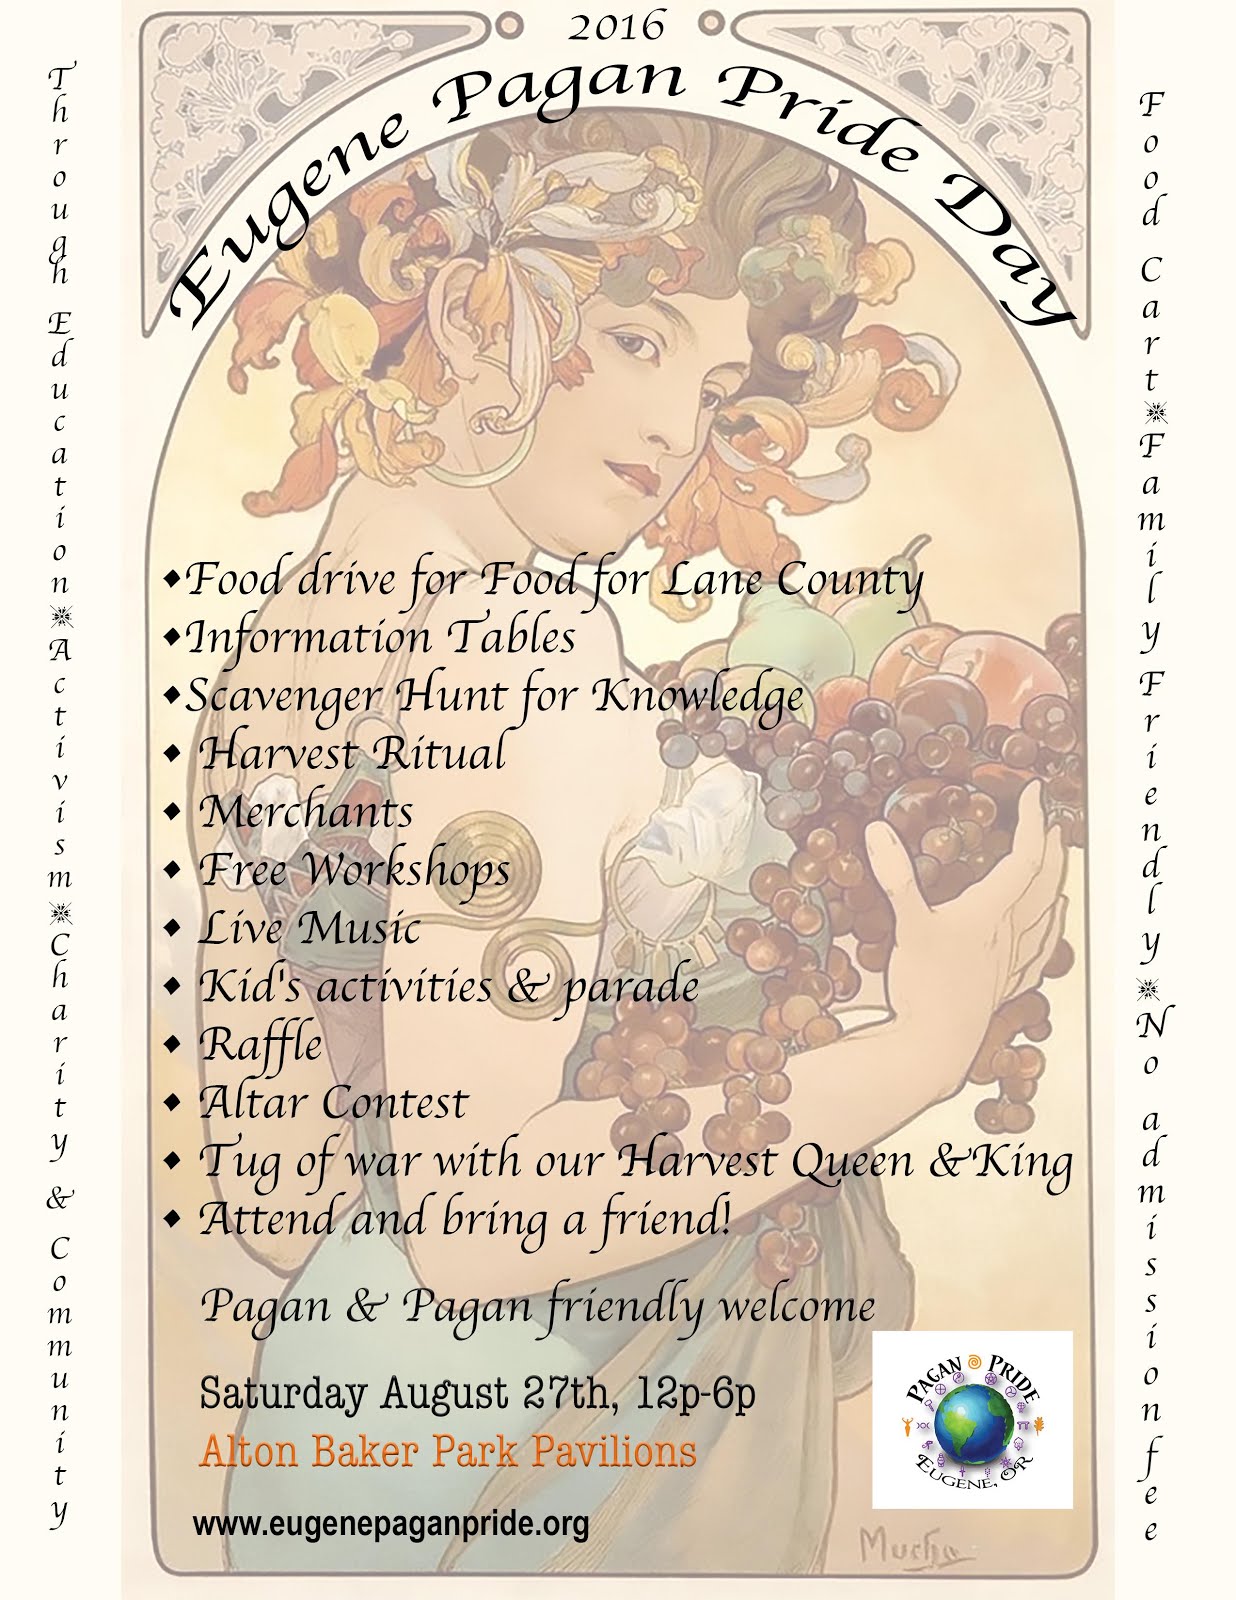 Eugene, Or: Pagan Pride Day!